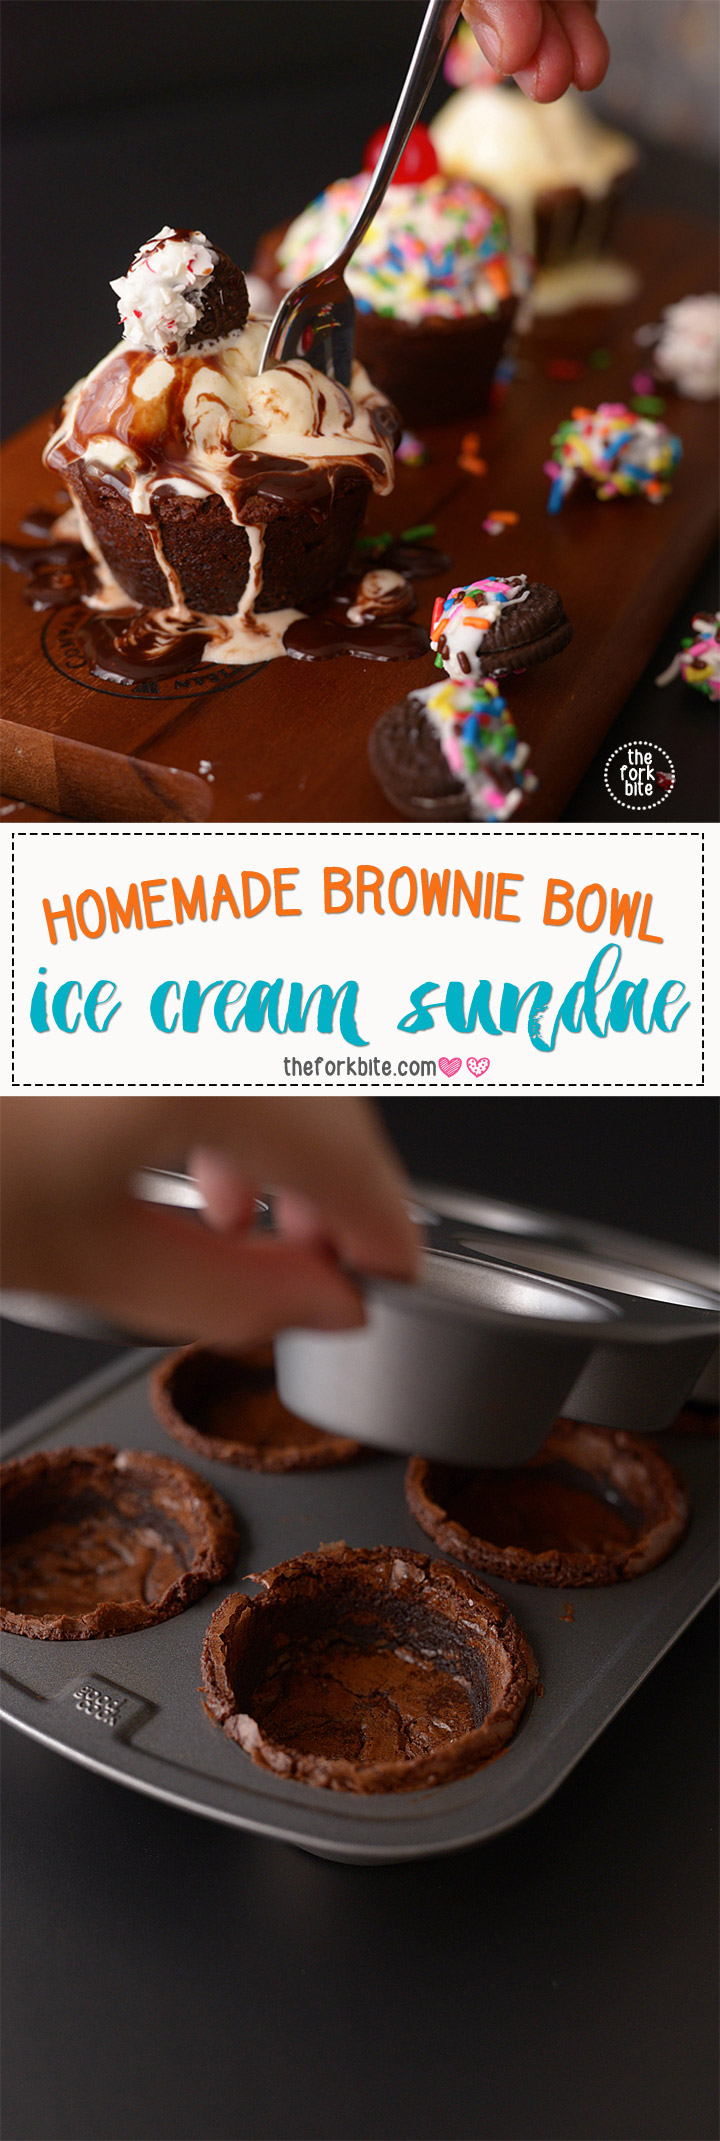 Brownie Bowl Ice Cream Sundae - The only thing better than your favorite ice cream is the same ice cream served in a delicious edible brownie bowl or cup